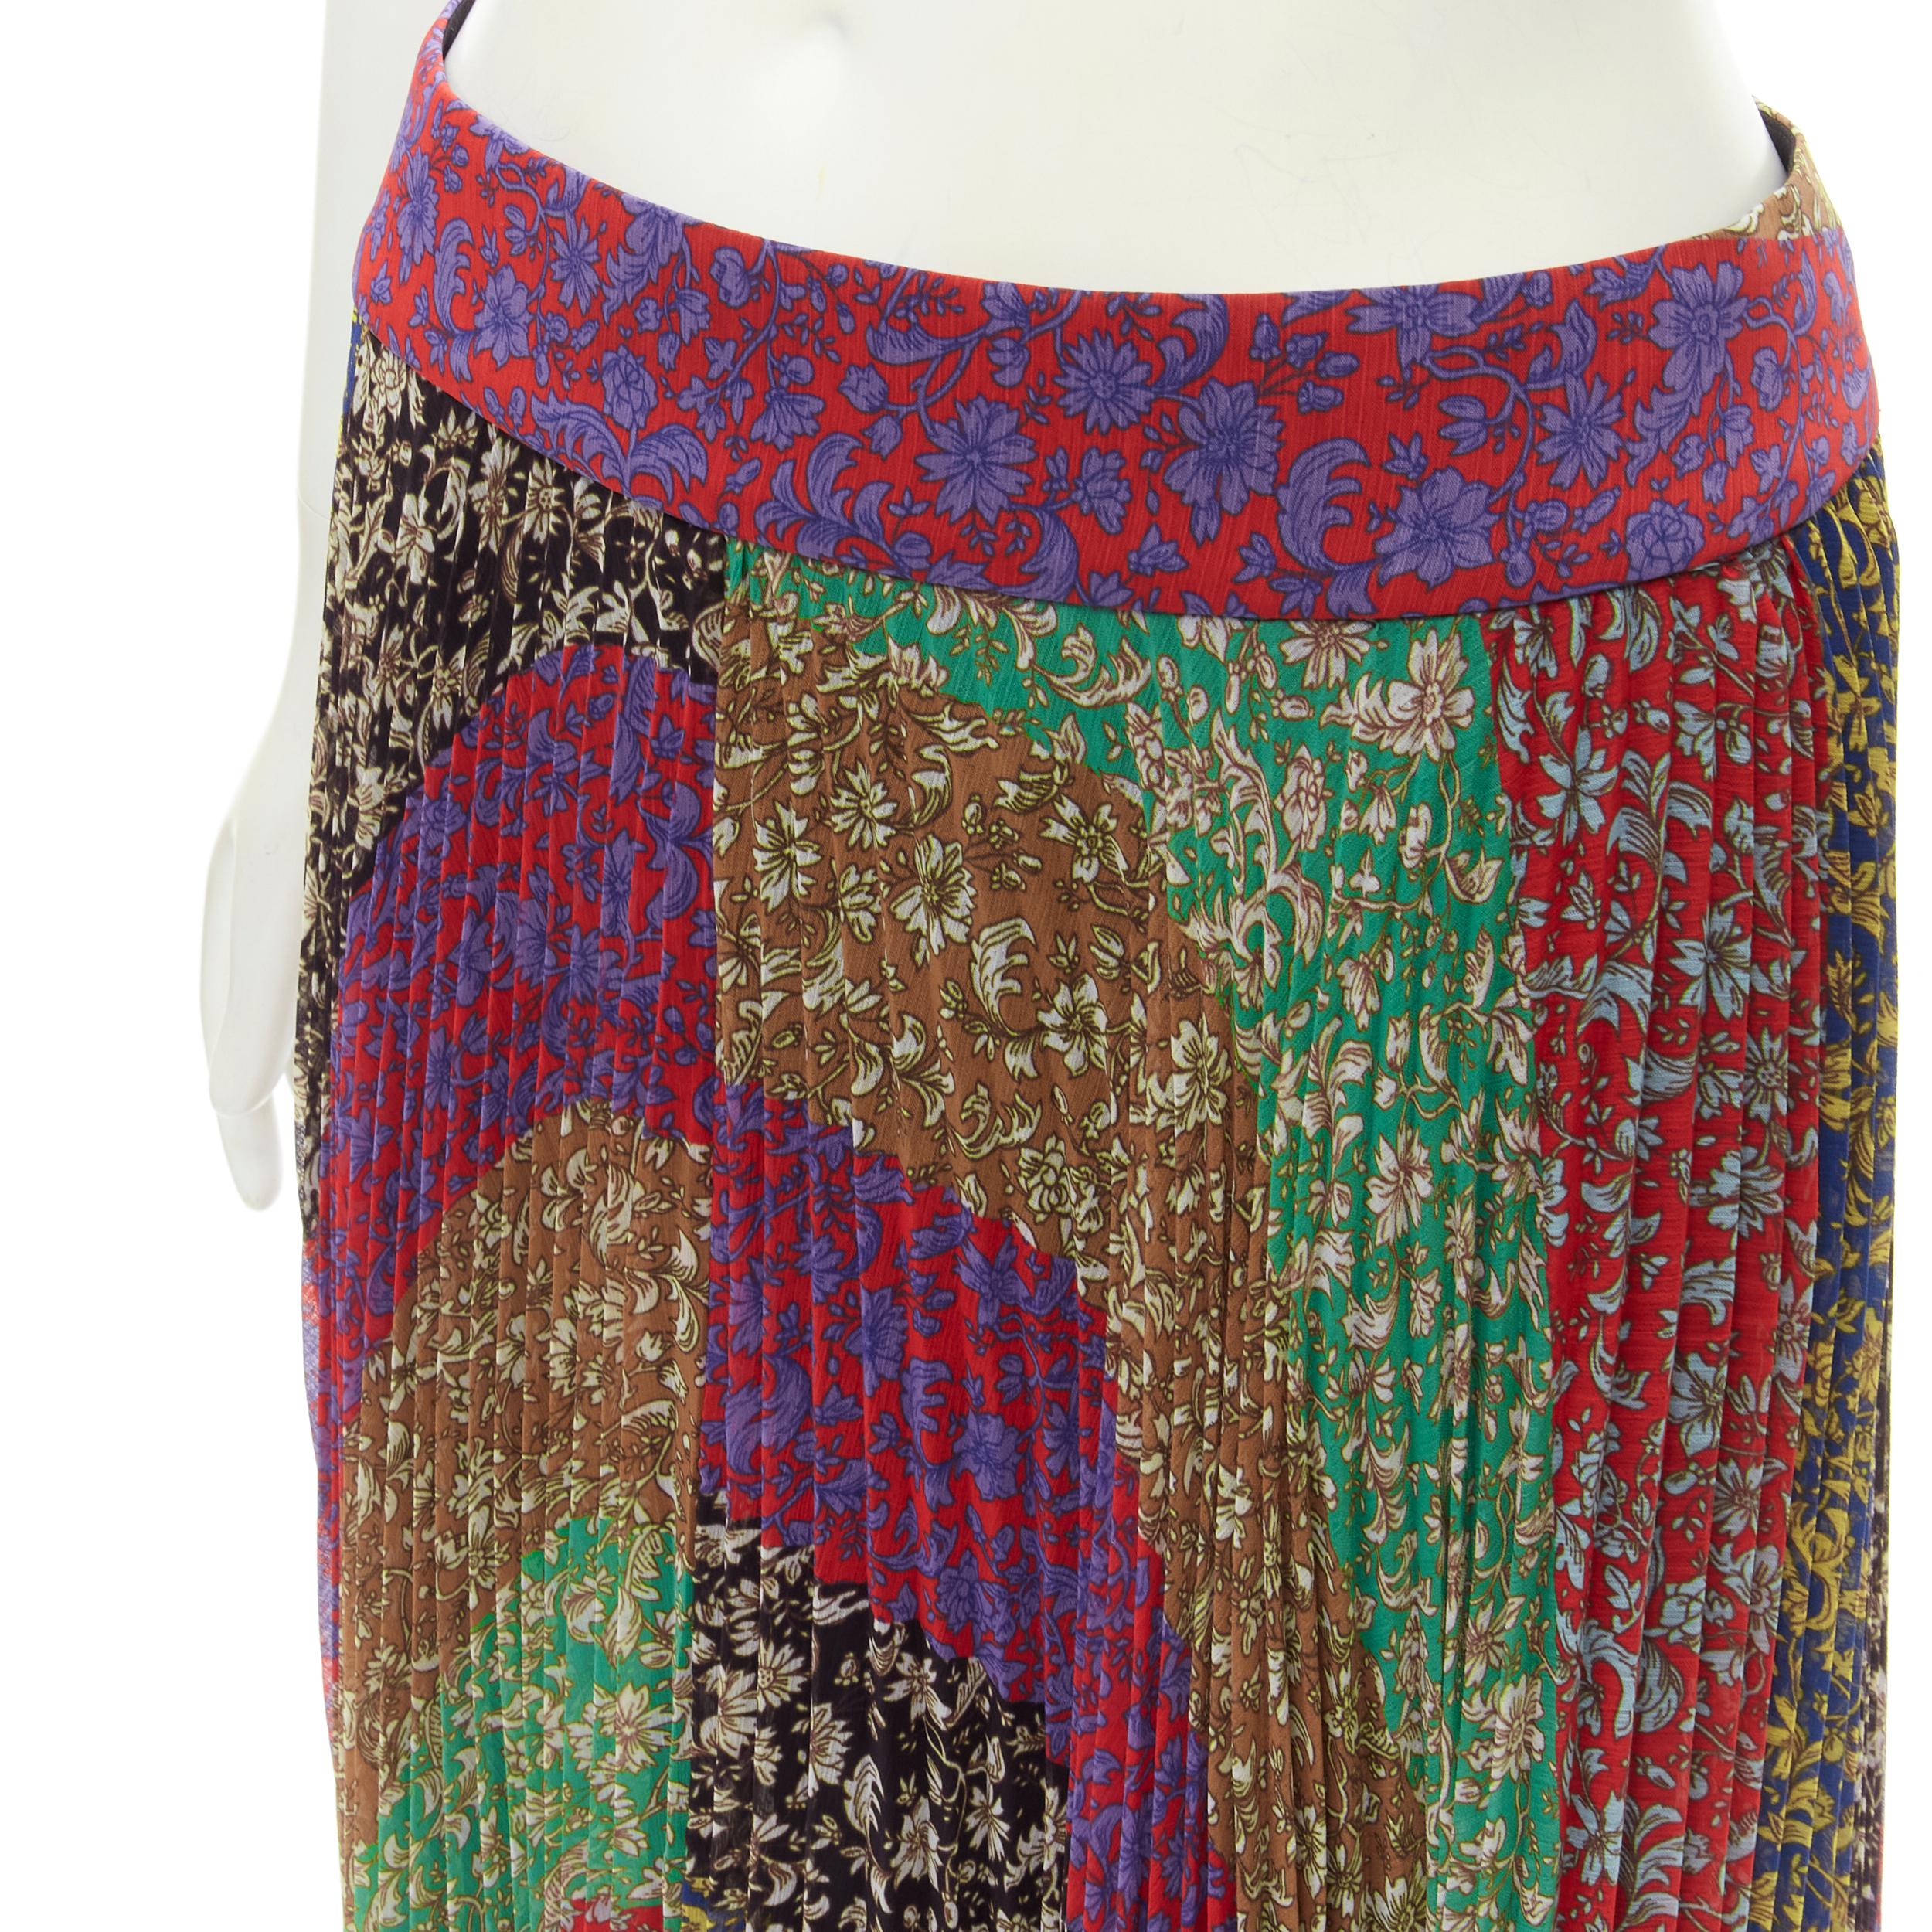 new ALICE OLIVIA Jasmine Stripe multi paisley pleated long skirt US6 M
Brand: Alice Olivia
Material: Polyester
Color: Multicolour
Pattern: Floral
Closure: Zip
Made in: China

CONDITION:
Condition: New with tags. 

SIZING:
Designer Size: US